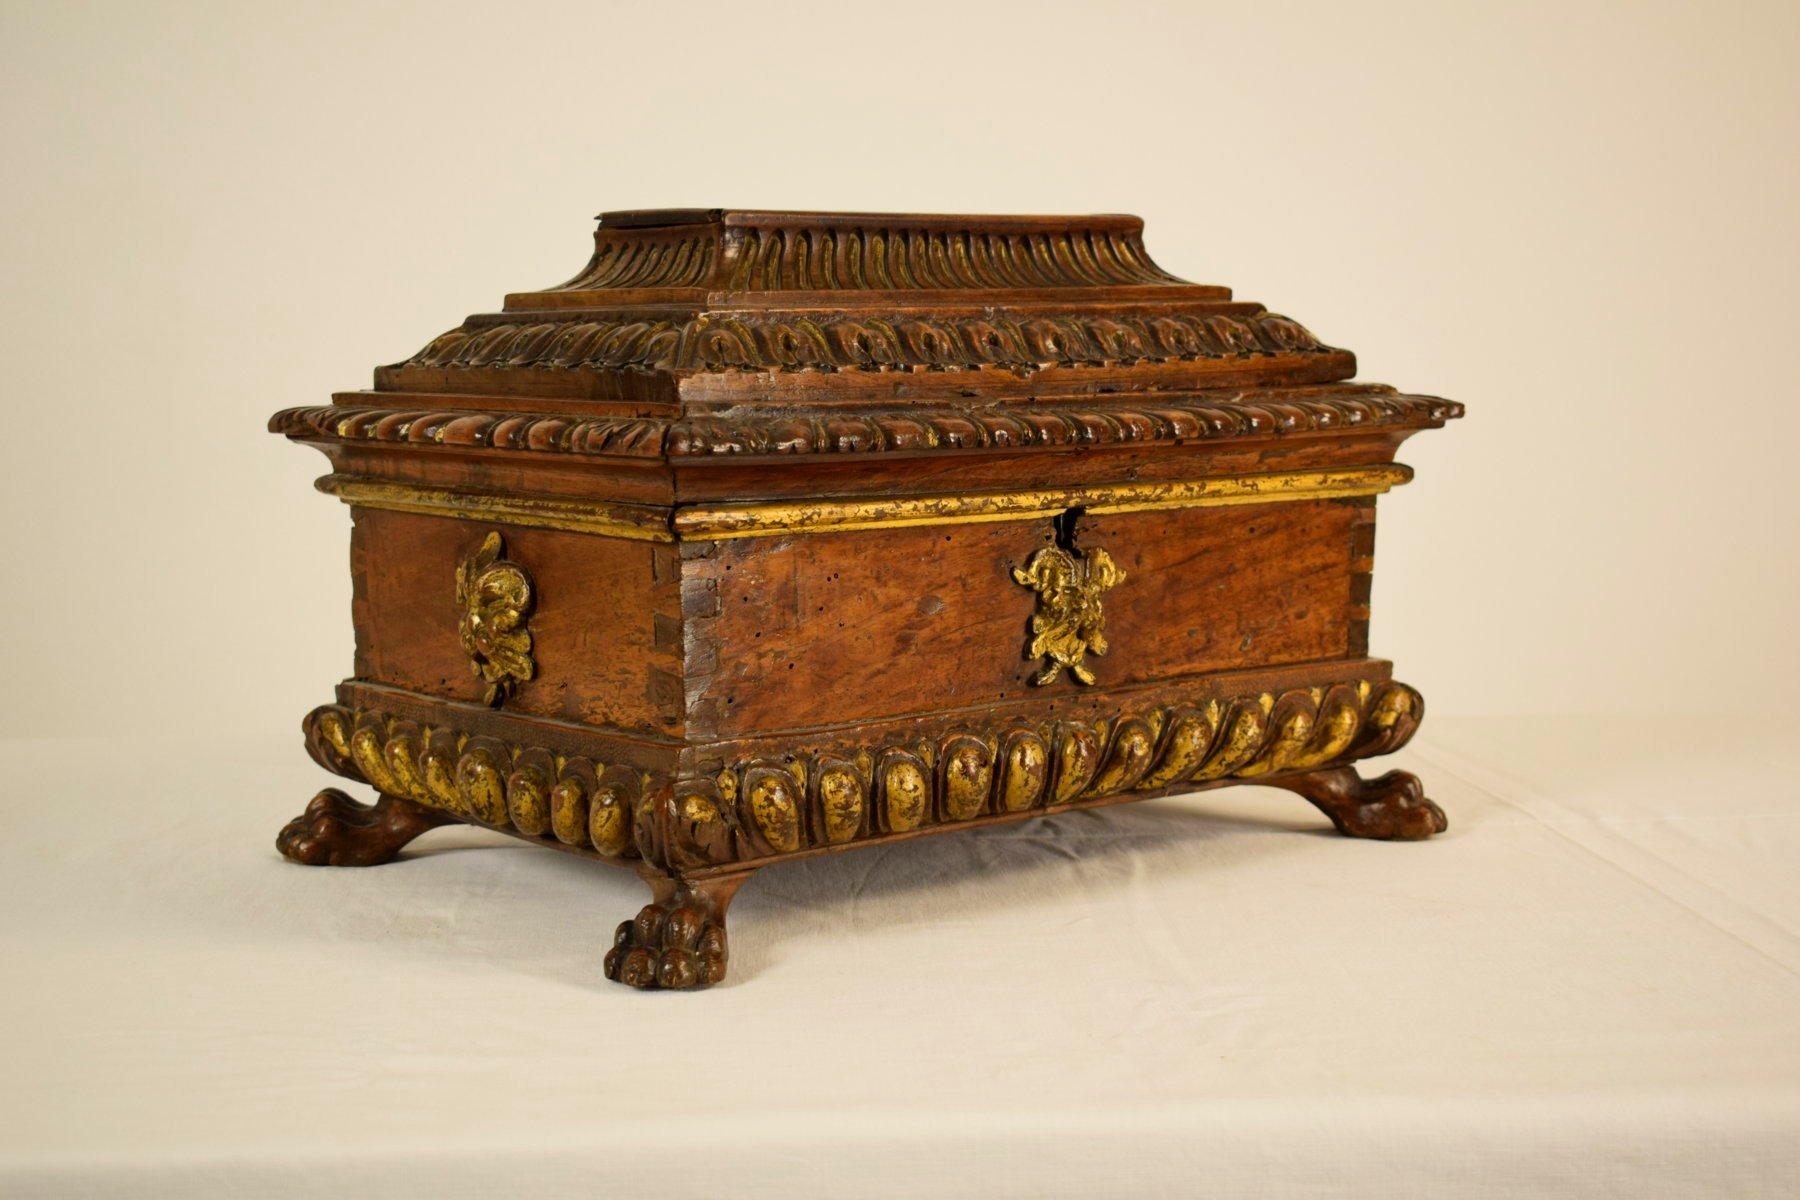 Precious box made in carved and gilded walnut wood, Tuscany (Italy) 16th century.
This type of gift box was made as a jewelry box, sometimes used to hold wedding gifts, carrying jewels and coins inside.
This wood box consists in a rectangular